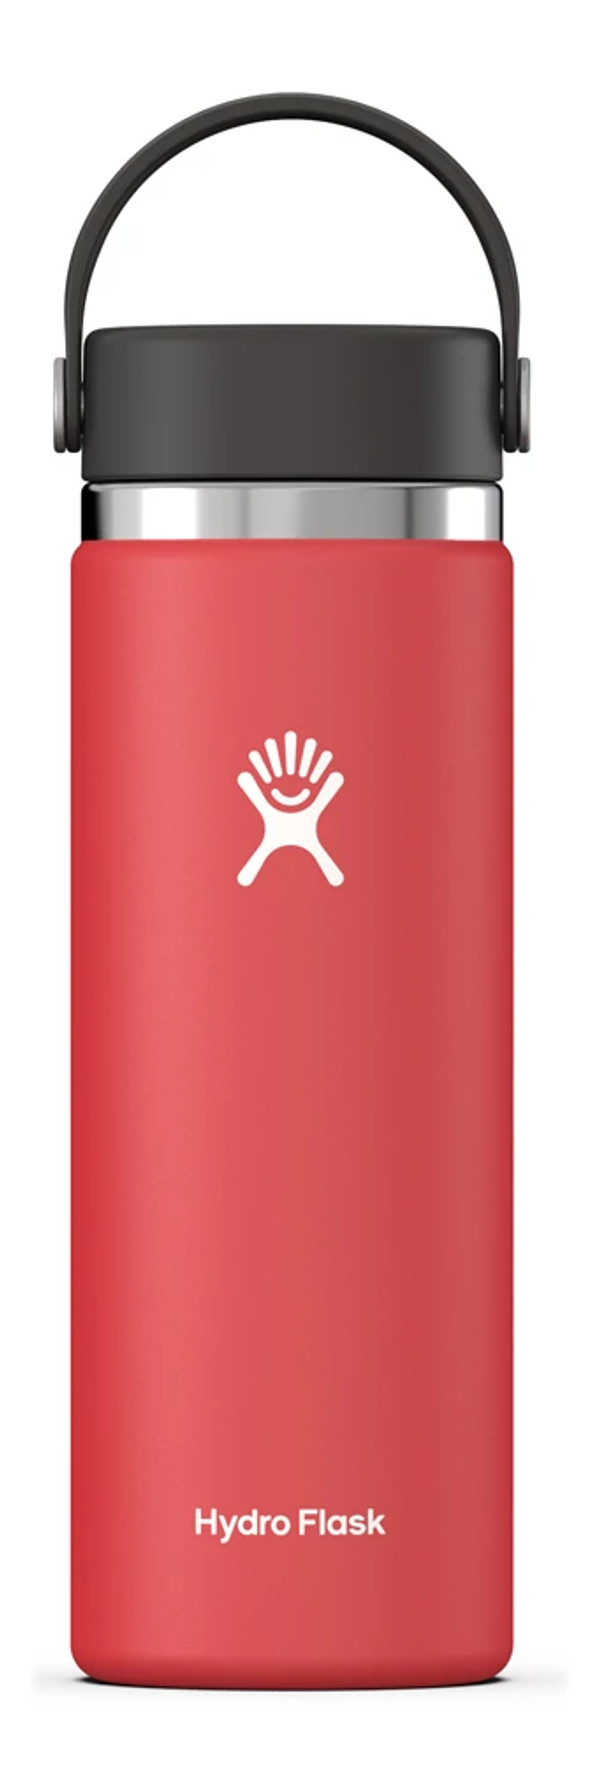 Hydro Flask 32-Ounce Wide Mouth Water Bottle with Flex Chug Cap